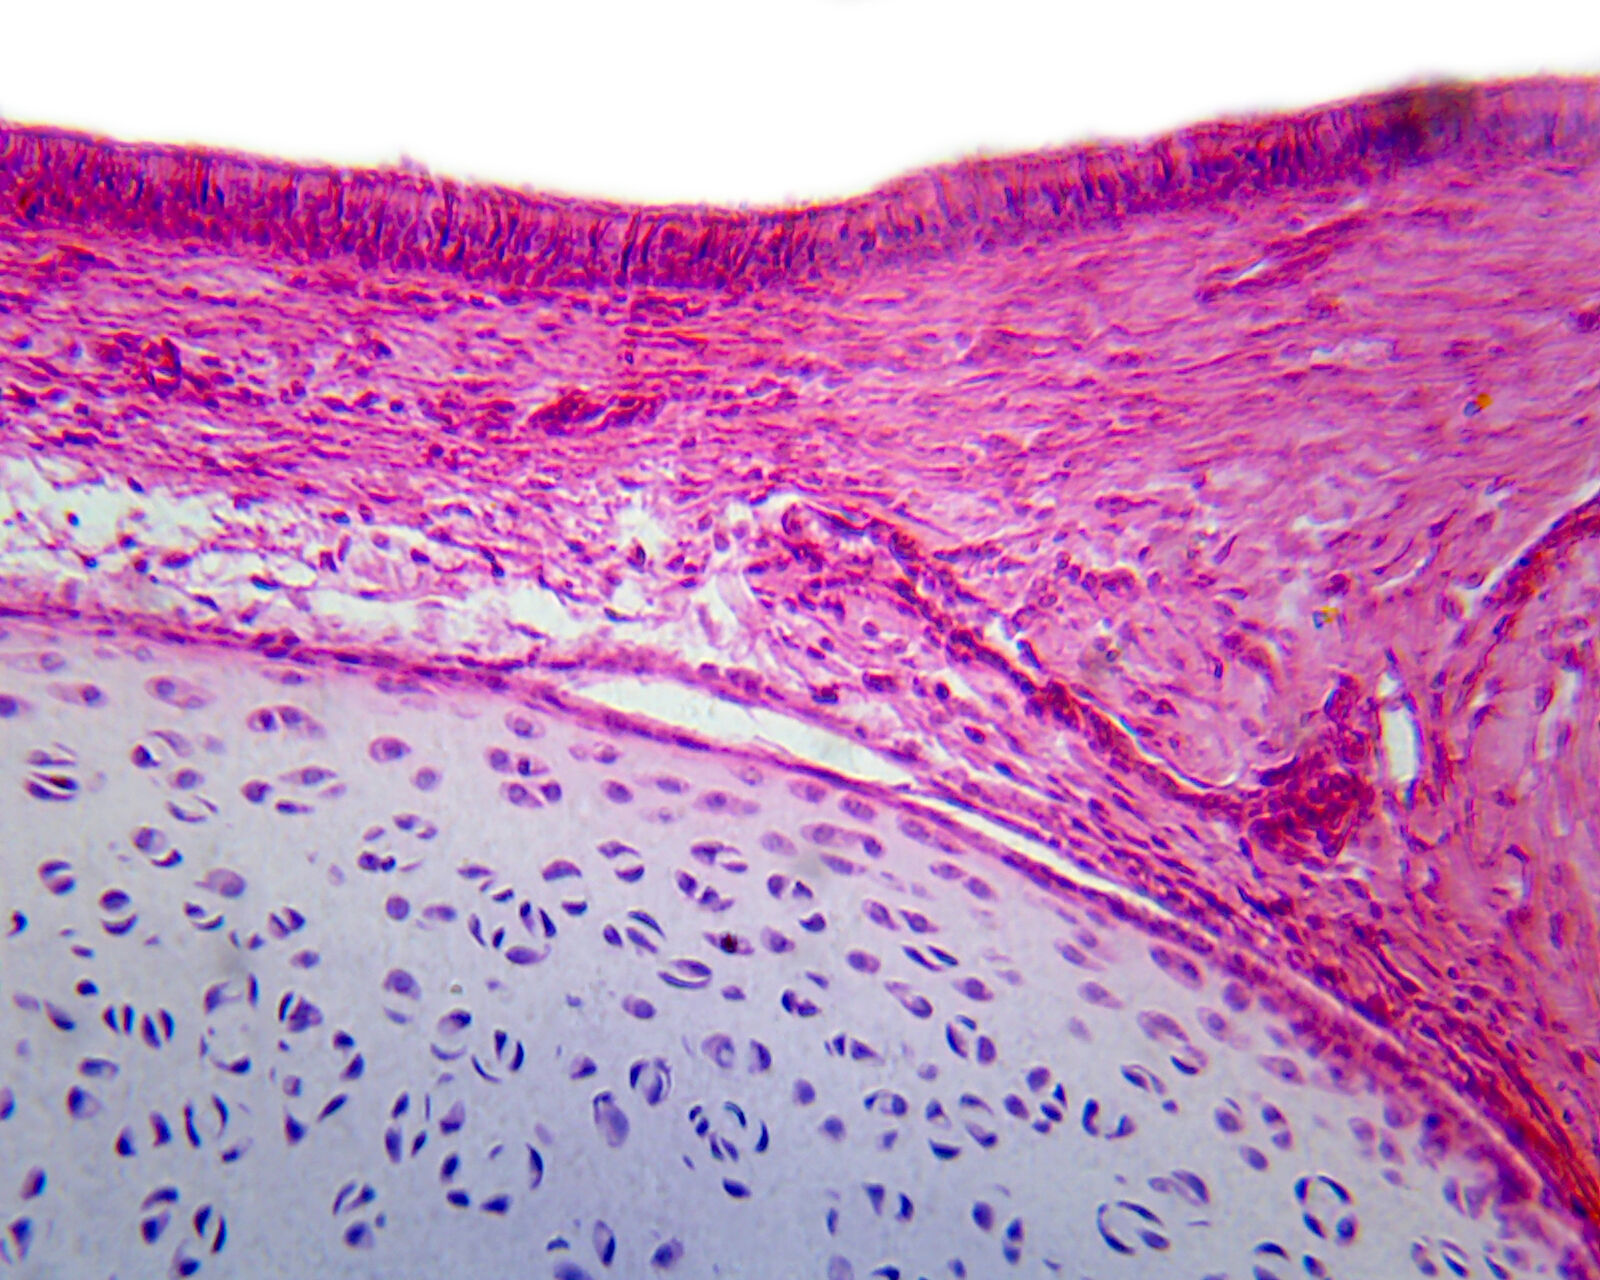 Ciliated Pseudostratified Columnar Epithelium from Respiratory Tissue,